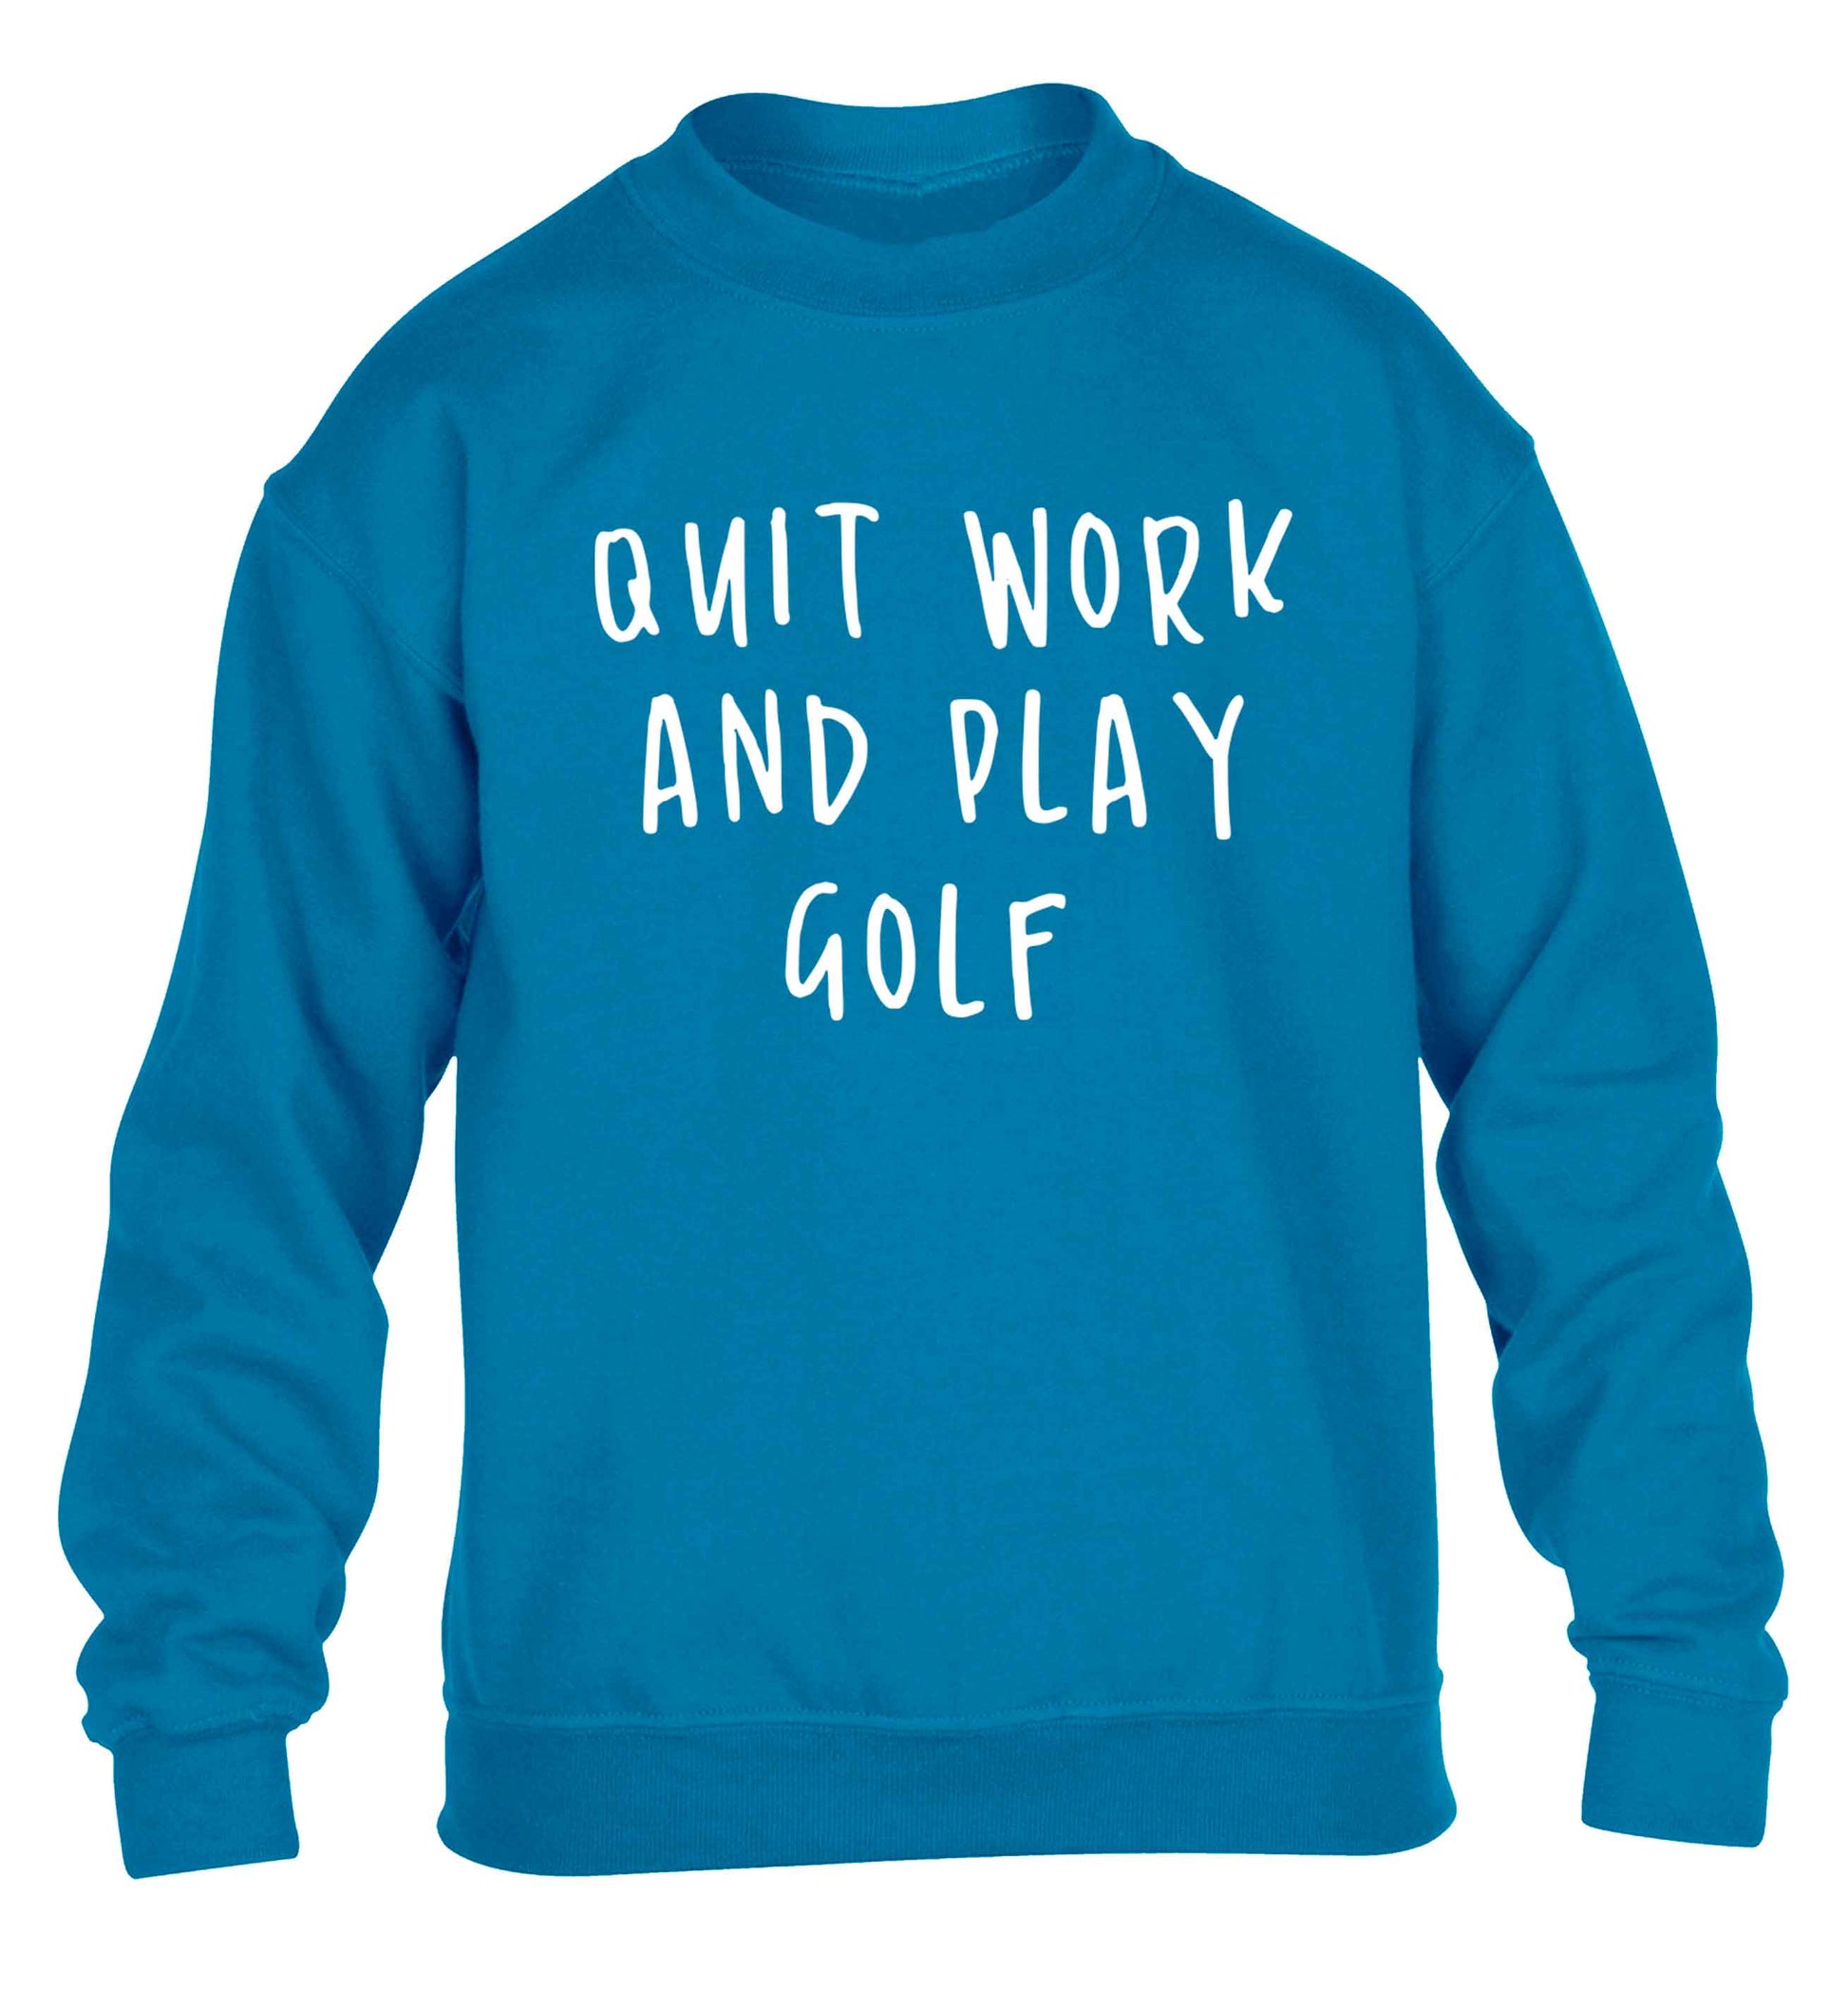 Quit work and play golf children's blue sweater 12-13 Years